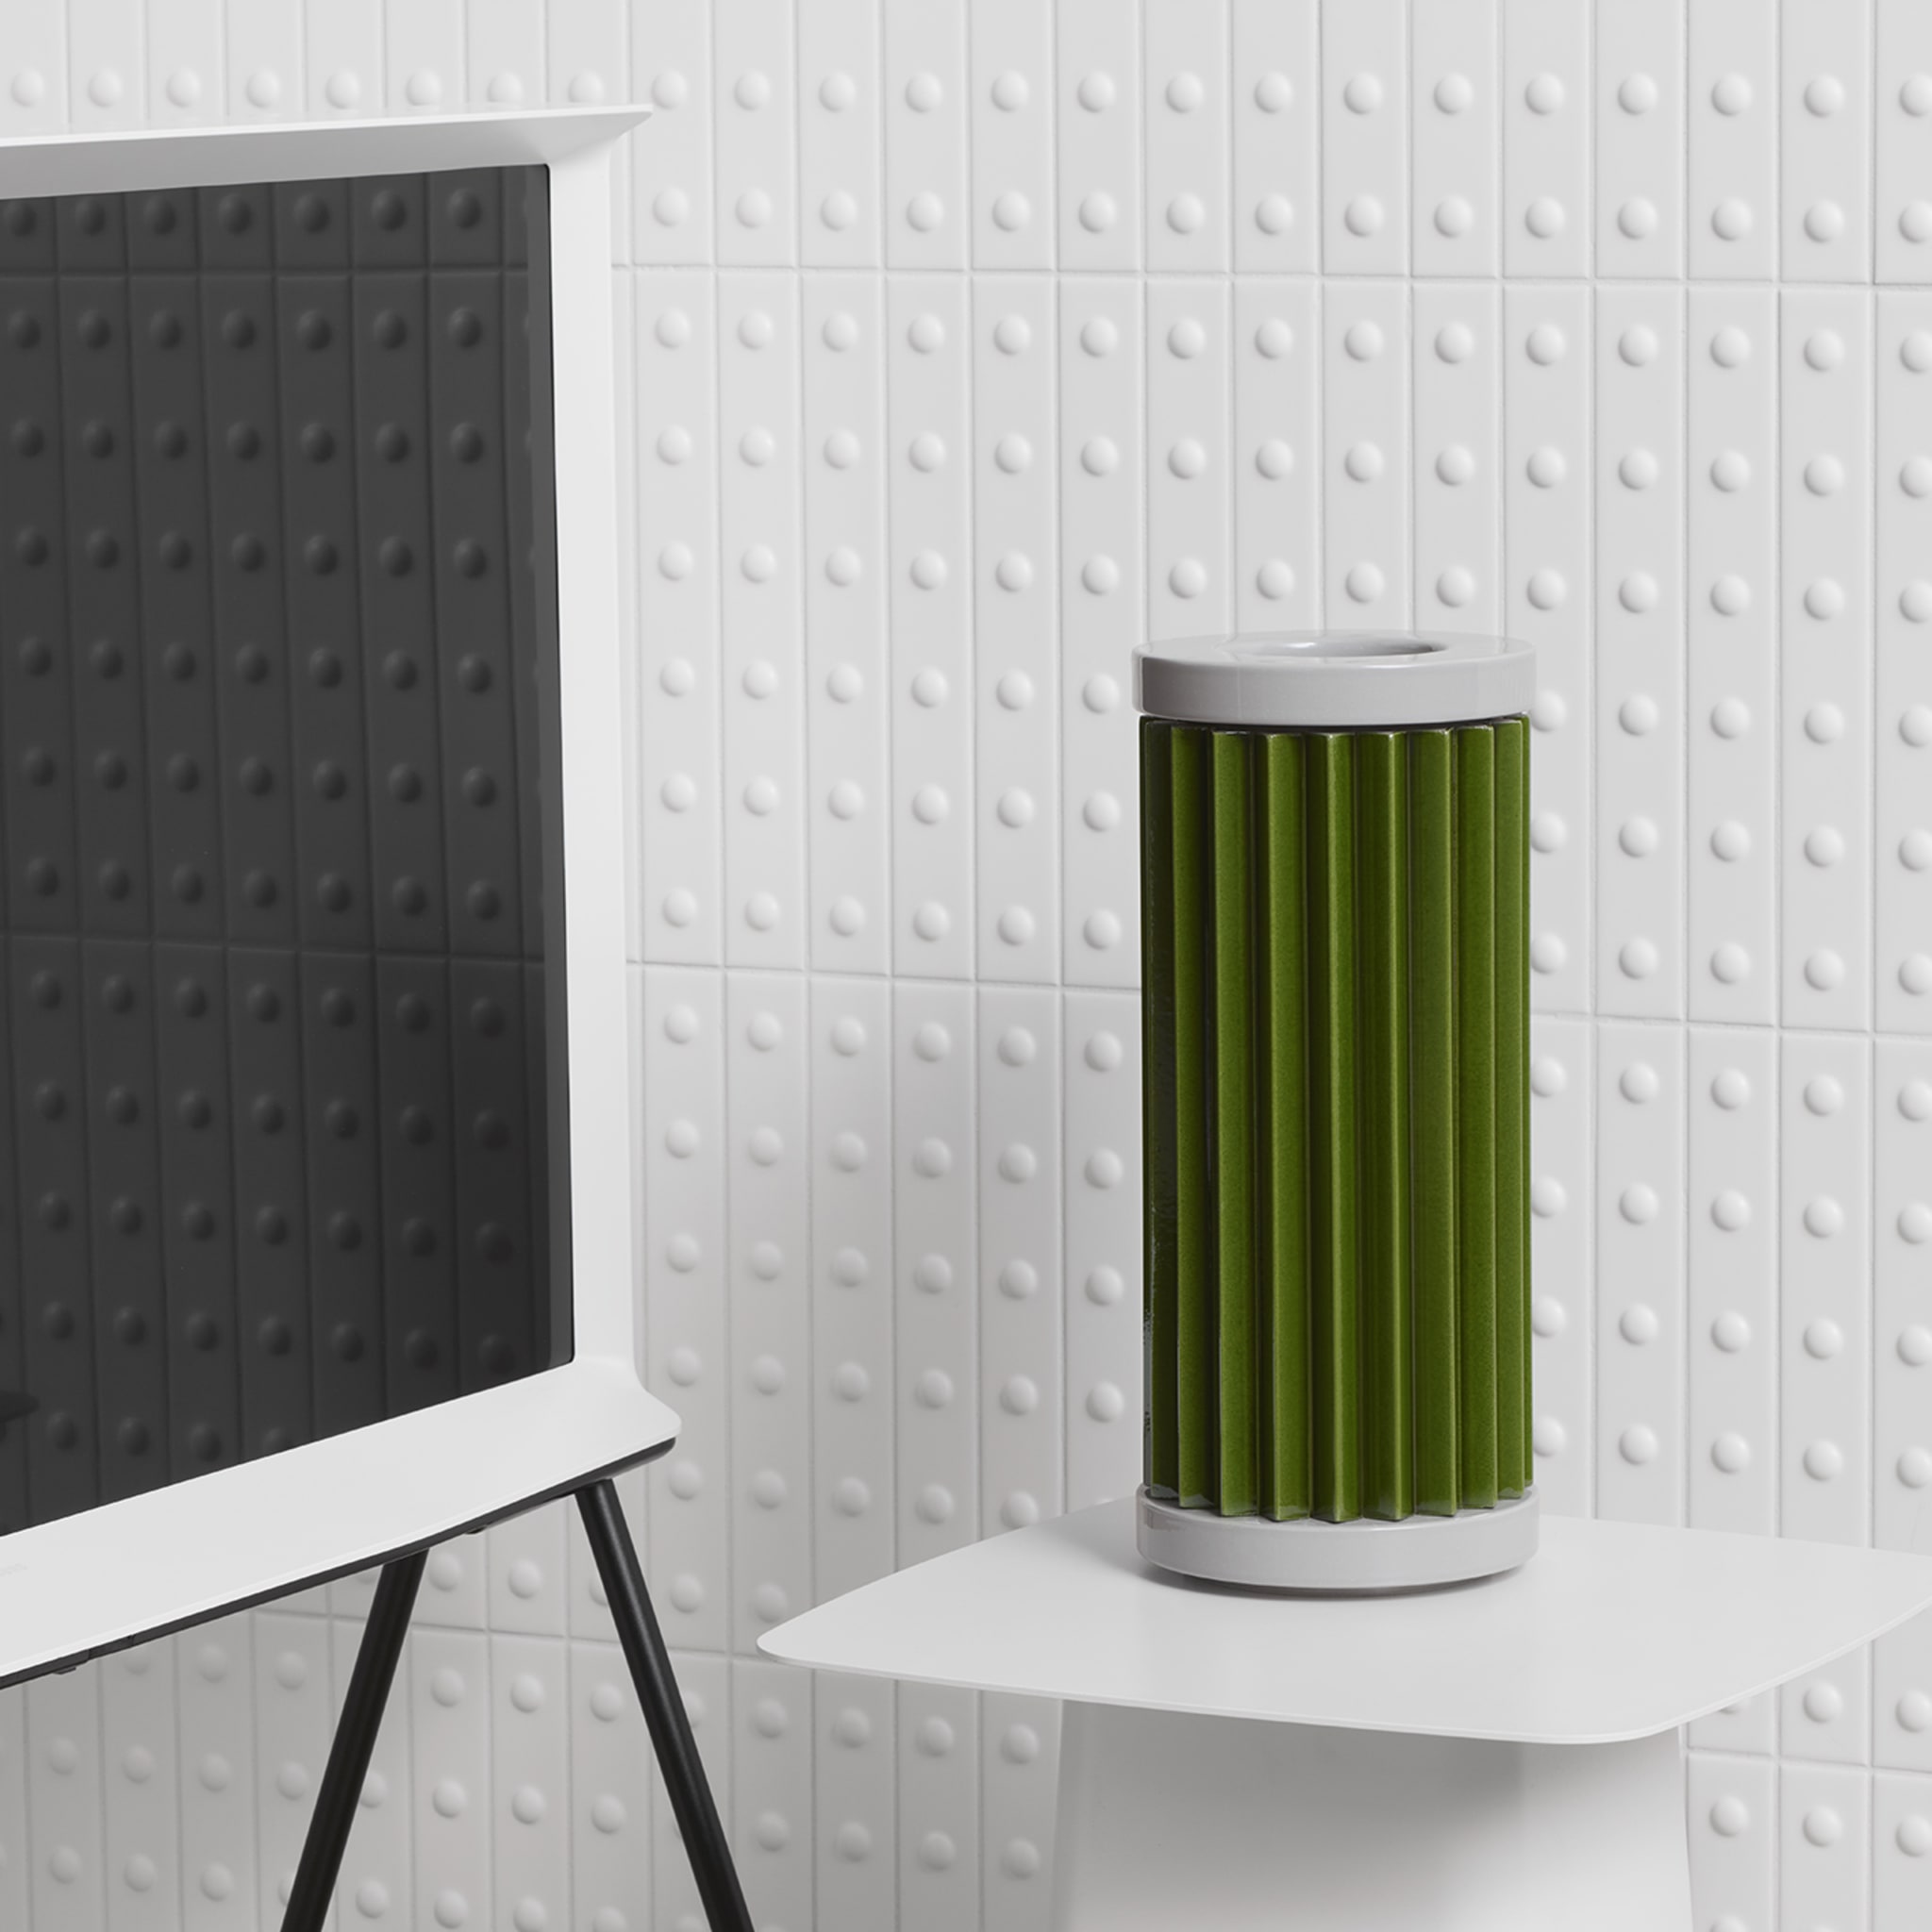 Rombini A Green and Gray Vase by Ronan & Erwan Bouroullec - Alternative view 3